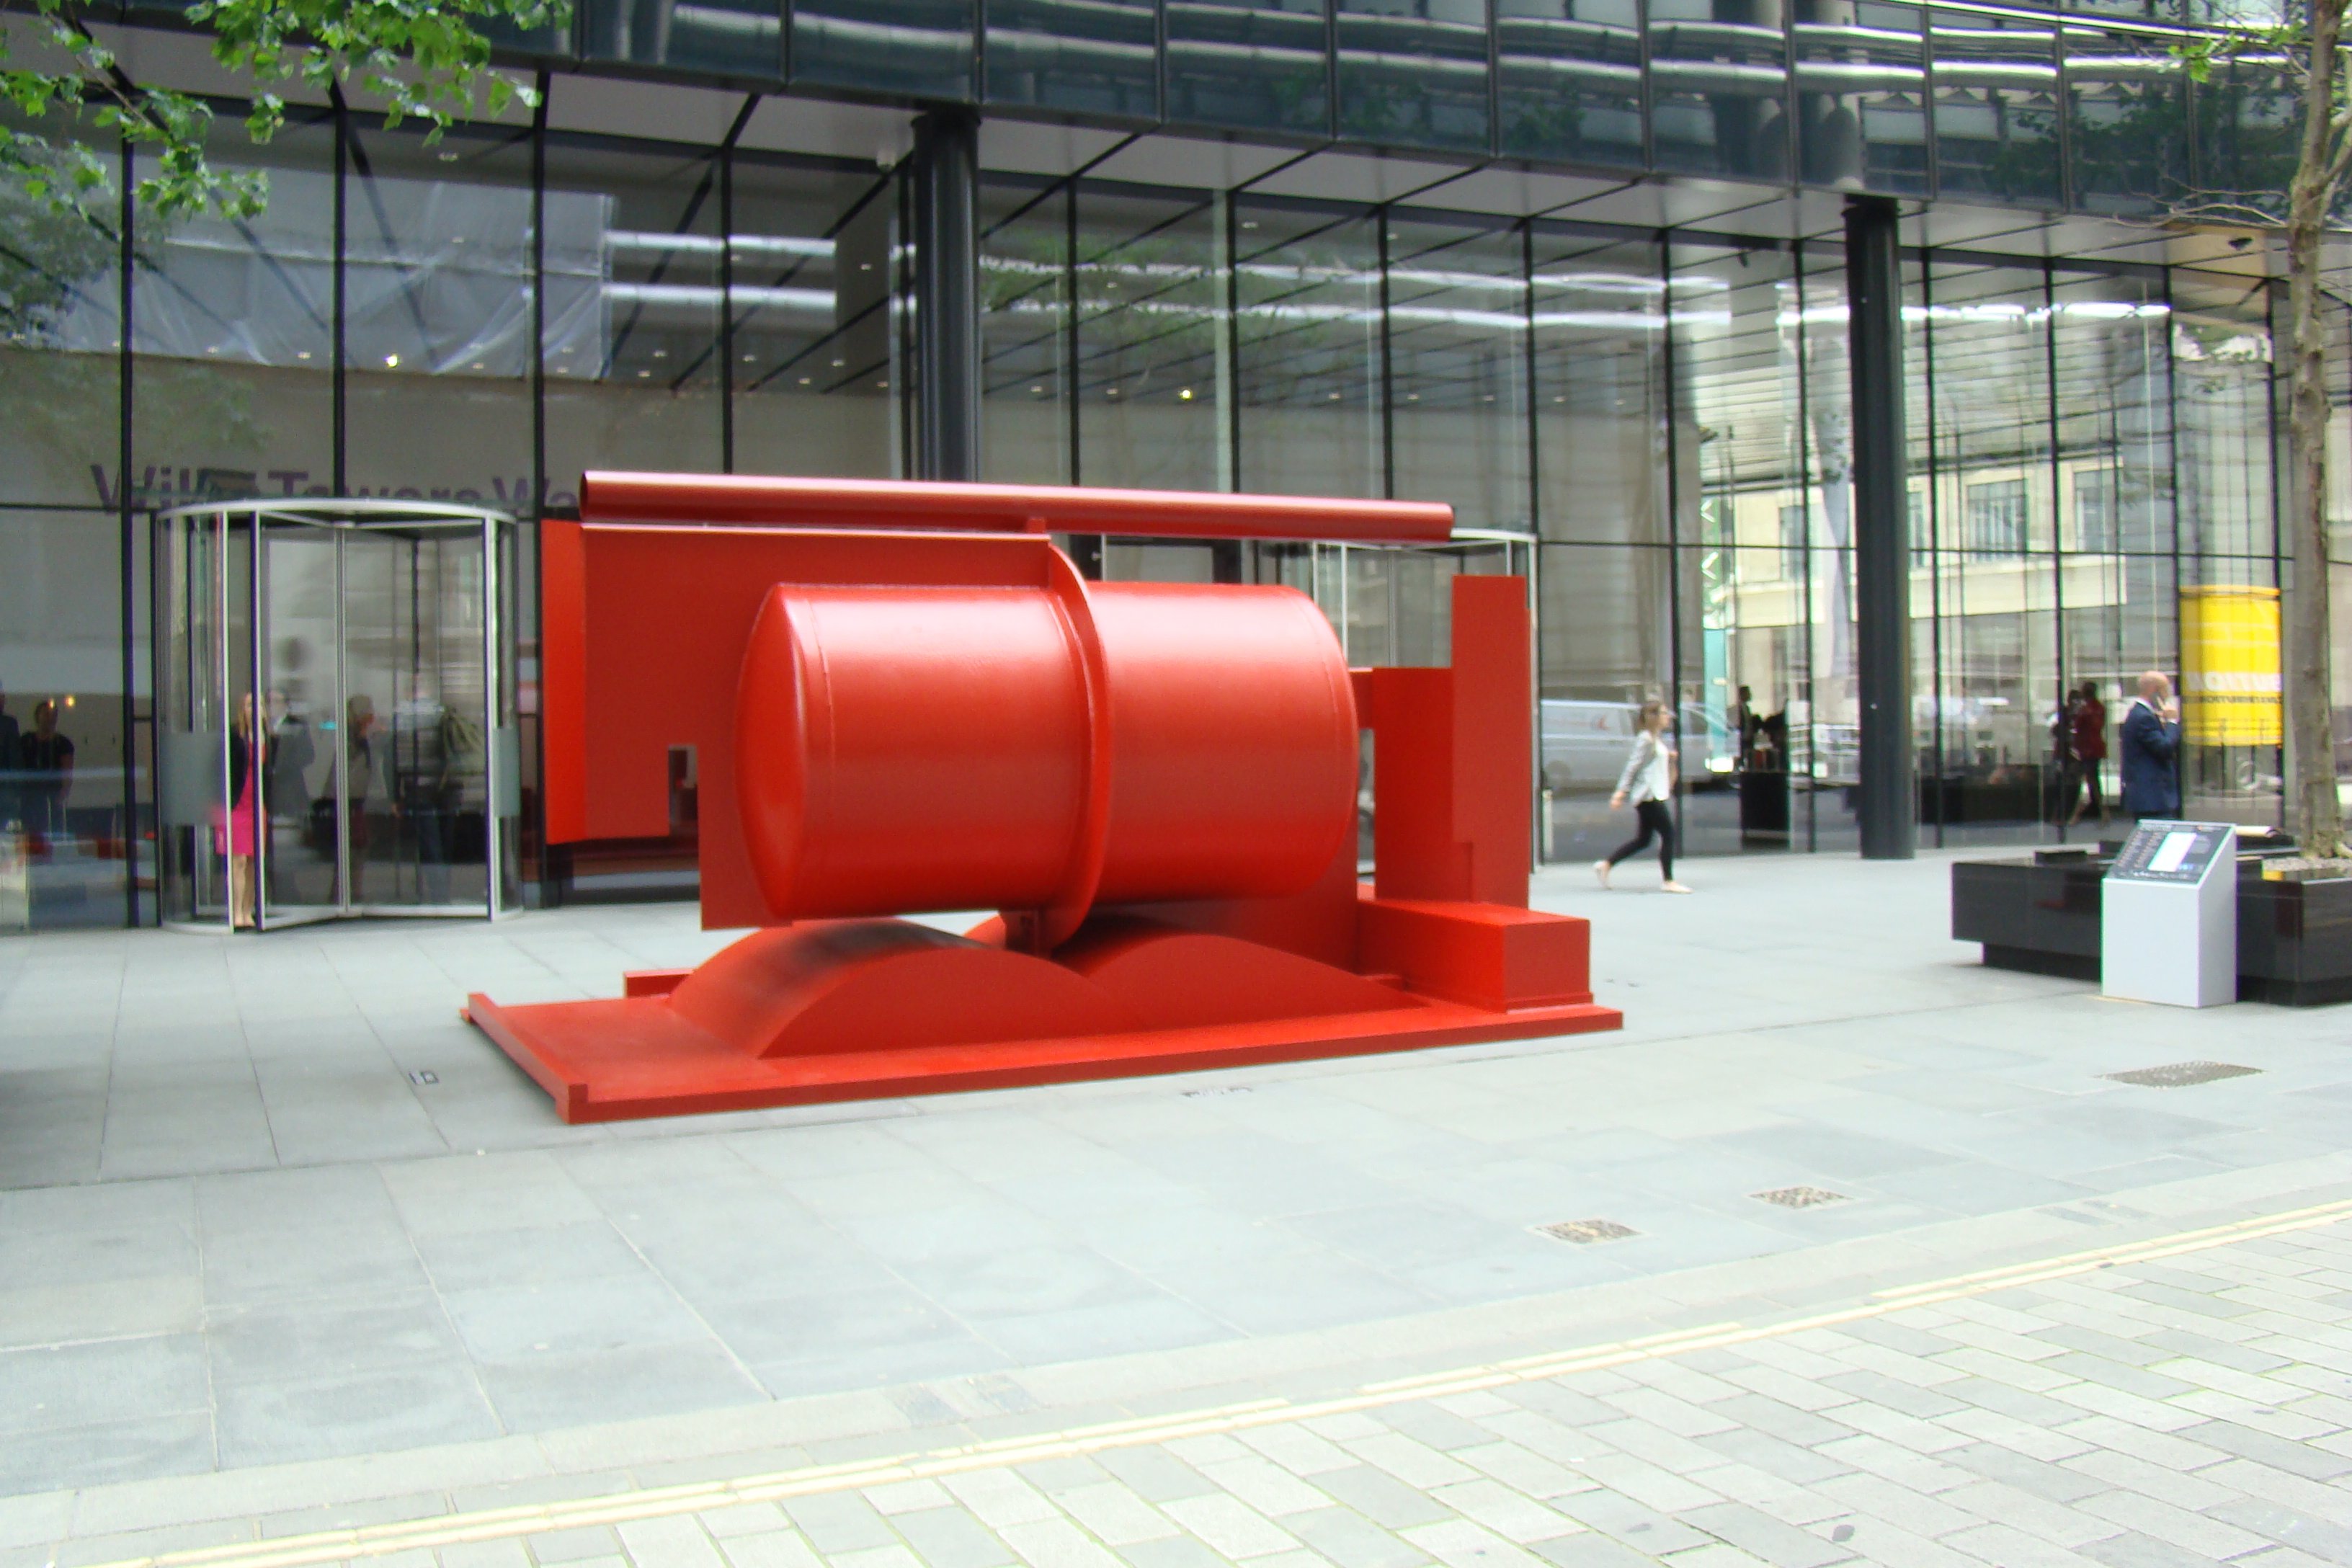 Sculpture in the City 2016, Londra - Anthony Caro